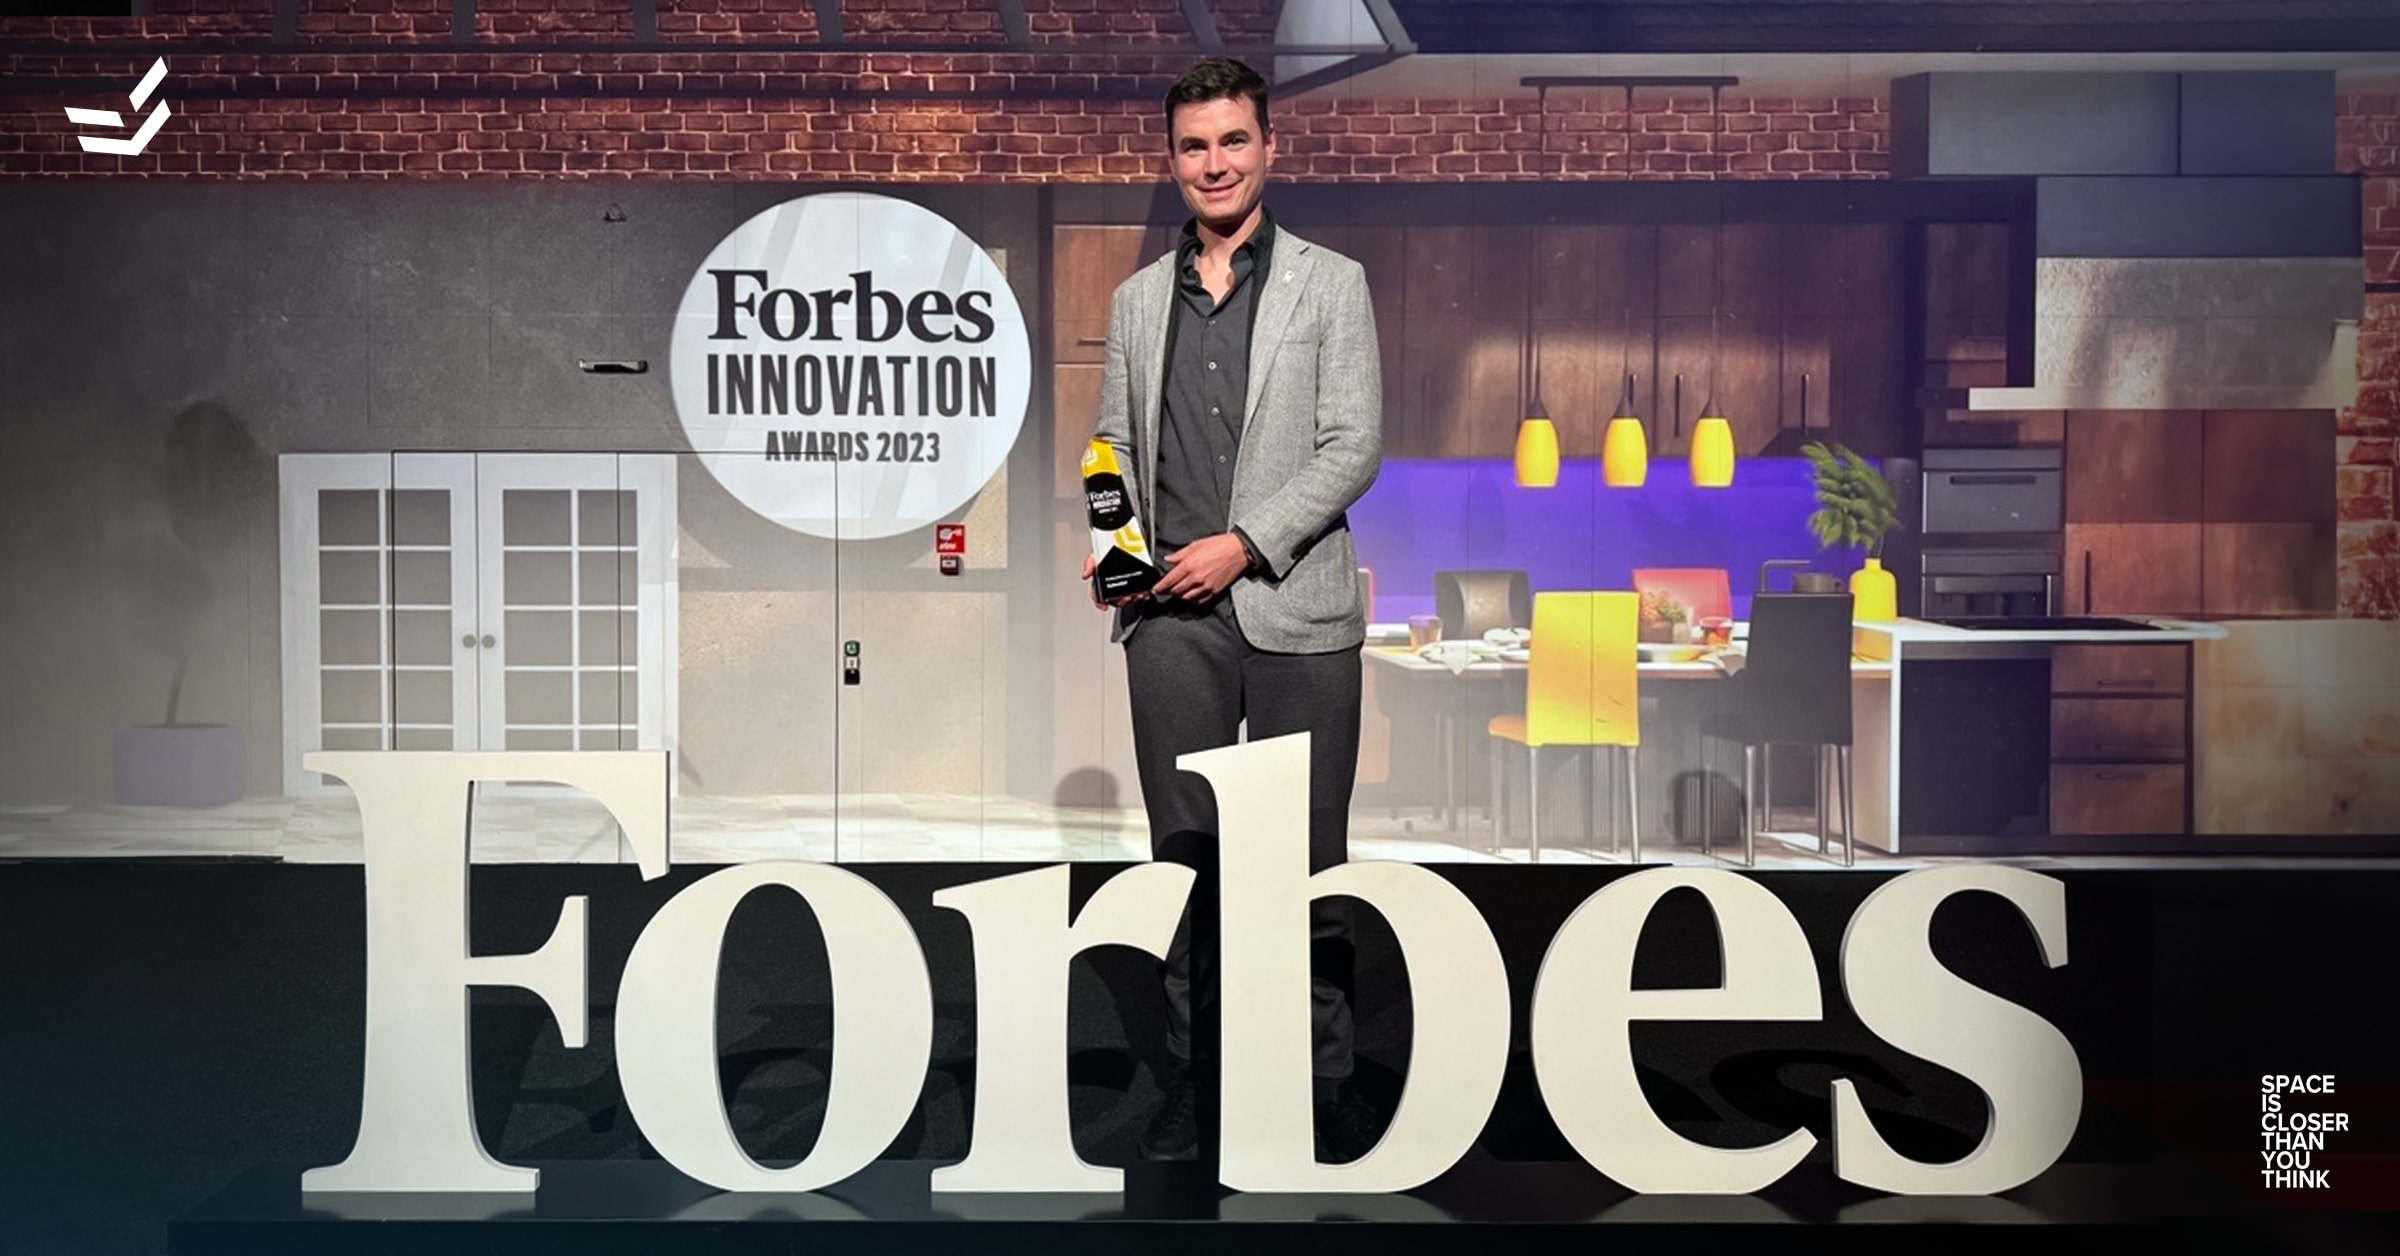 EnduroSat wins Innovative Service of the Year by Forbes